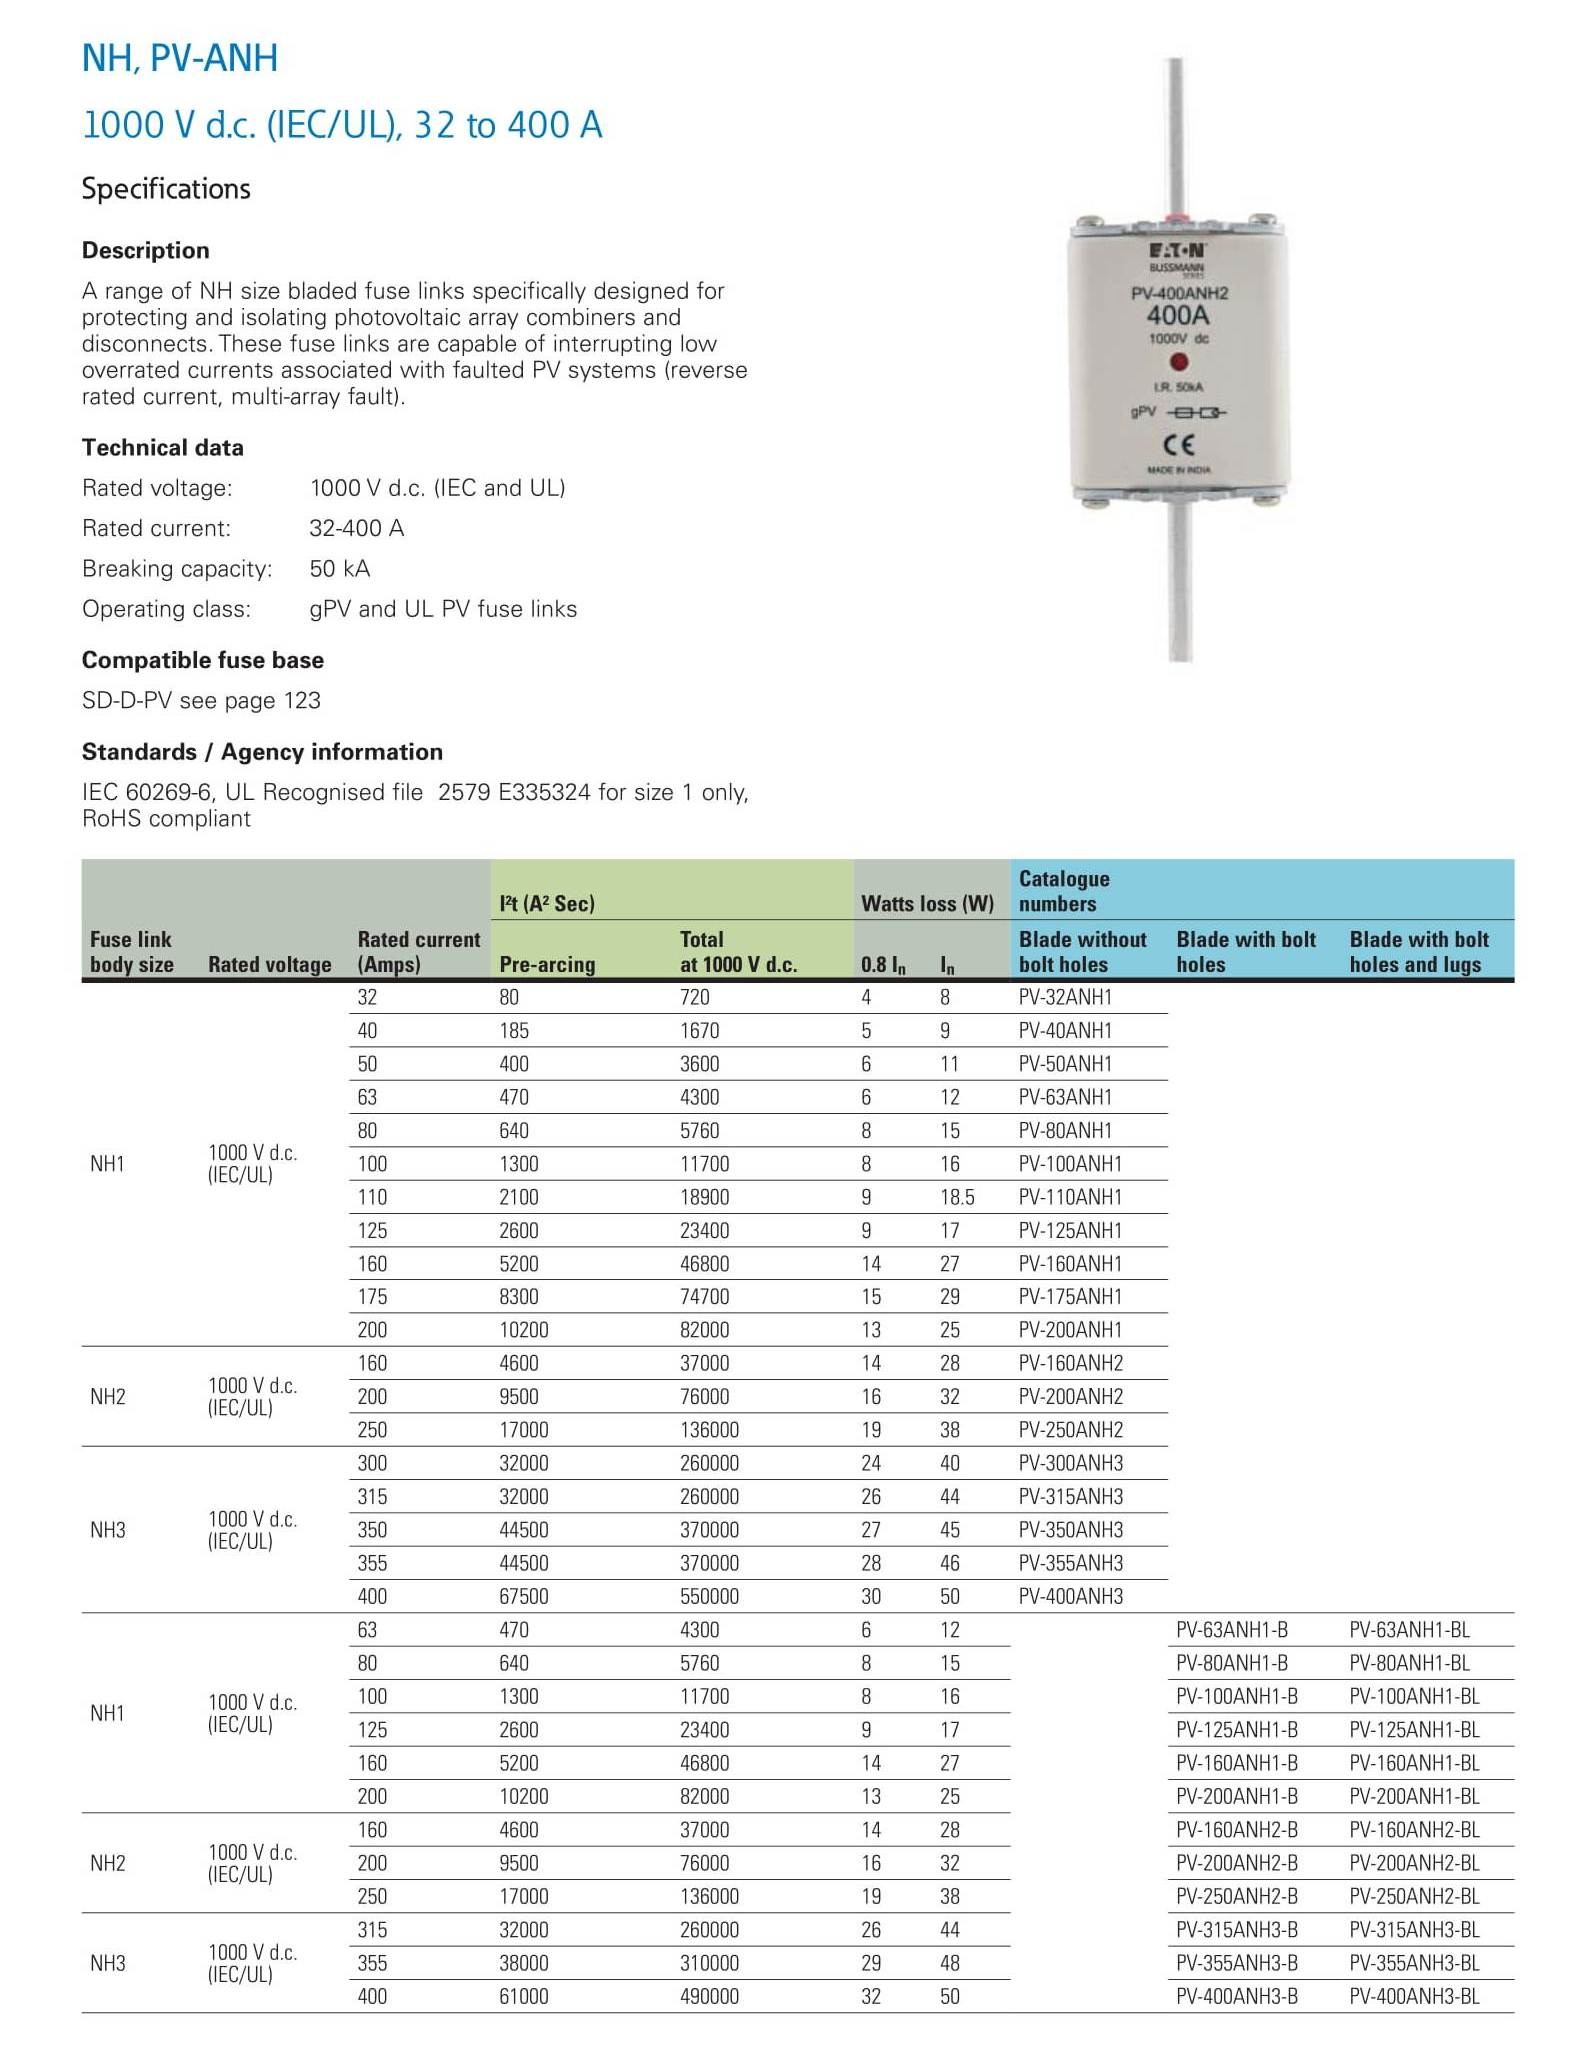 Photovoltaic Fuse Links 1000V, 32 to 400A